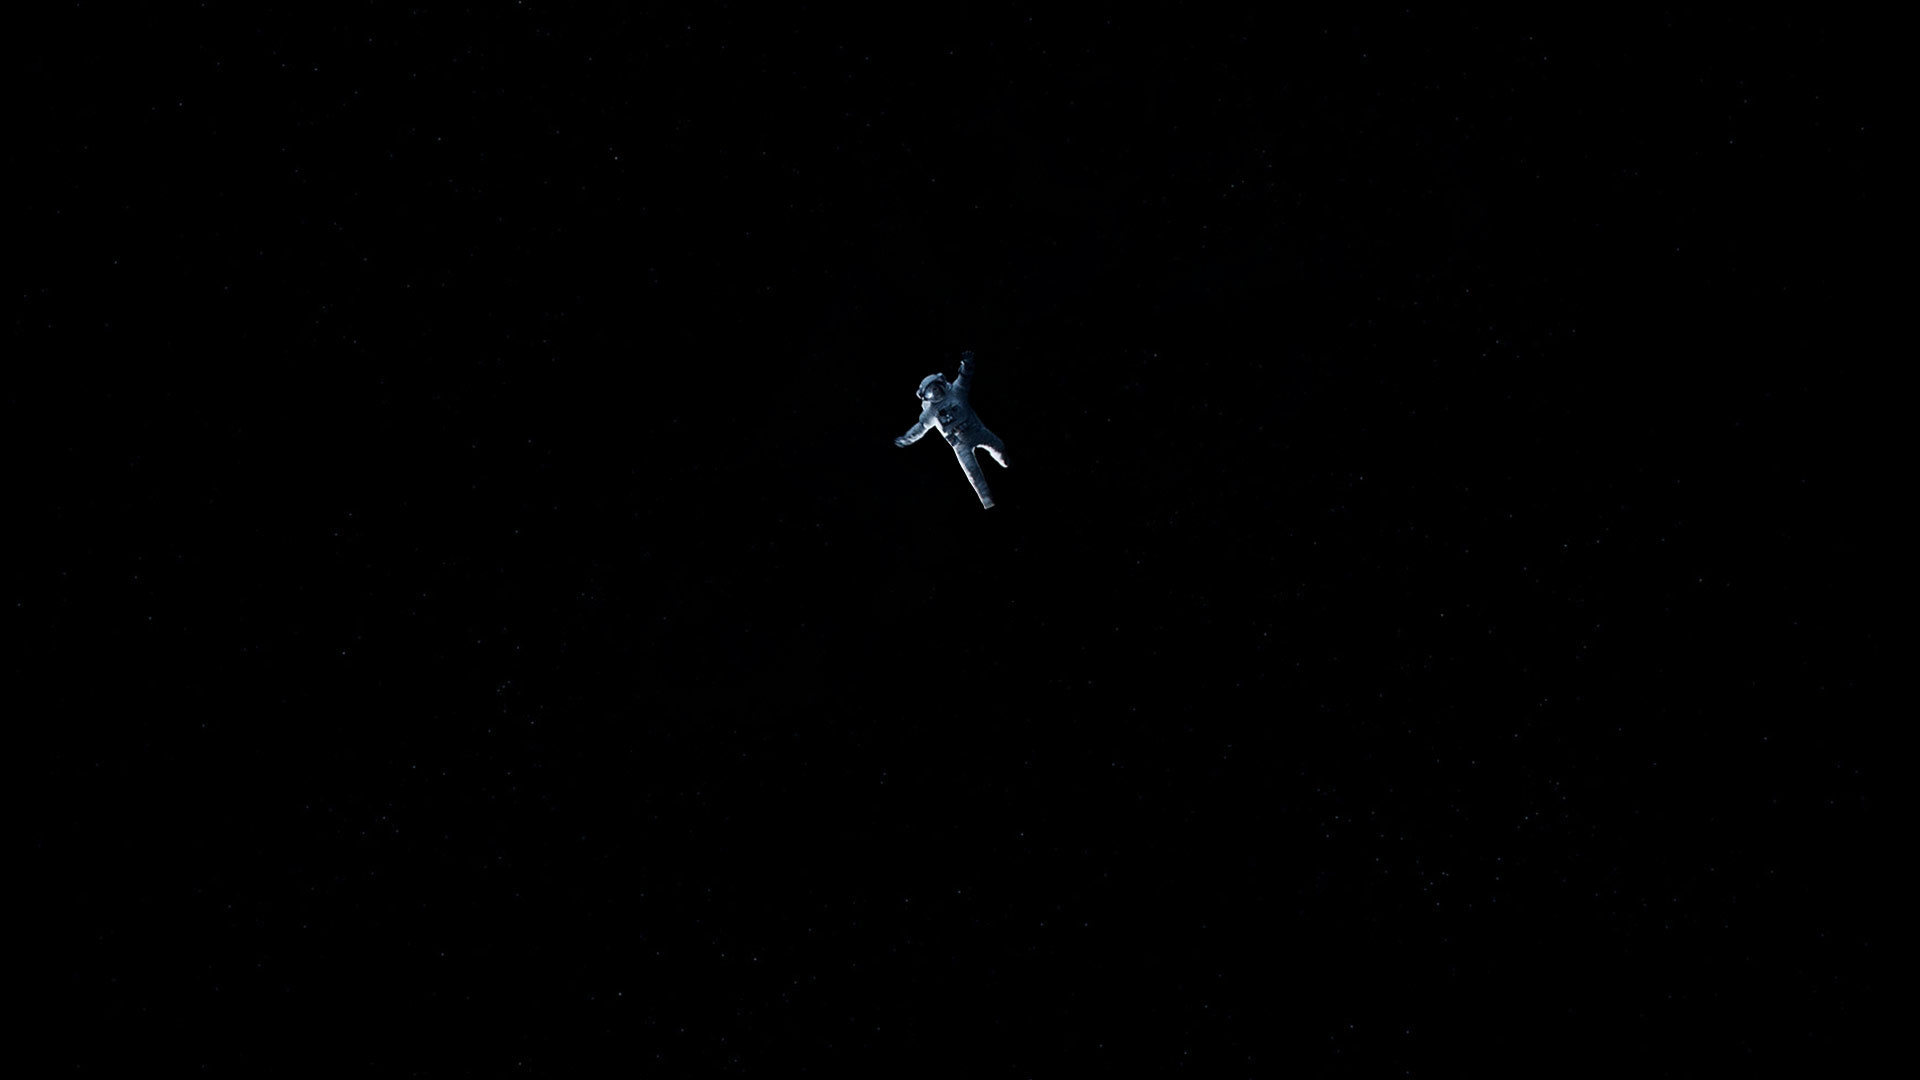 Gravity is a fantastic film. Sure, it may have a few issues here and there but its an experience few other films can match. Visually its an absolute